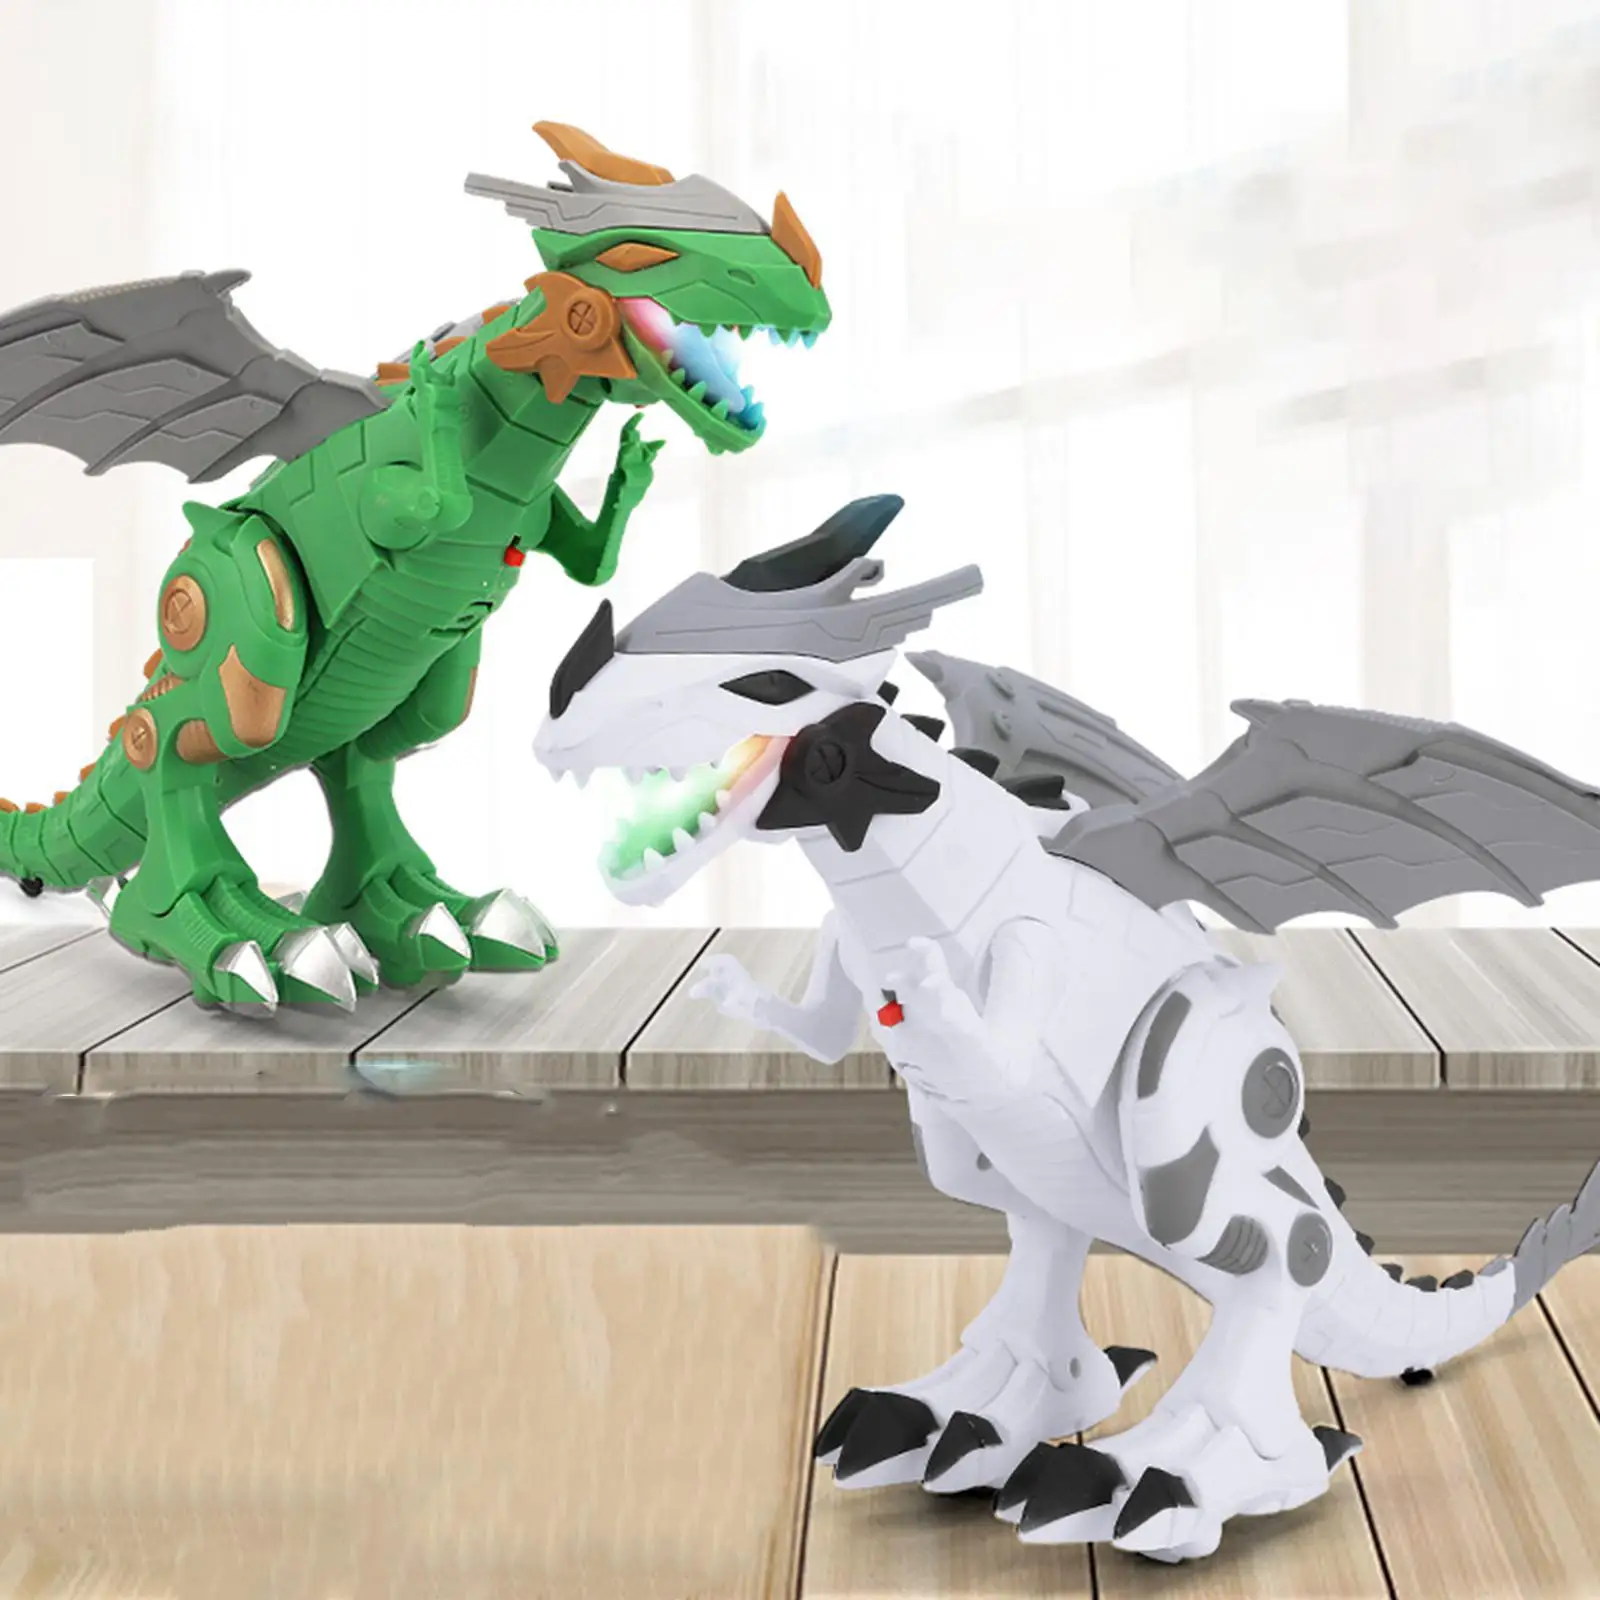  Mechanical Dinosaur Toys Walking Dinosaur with  Sounds for  5 6 7 Years Old